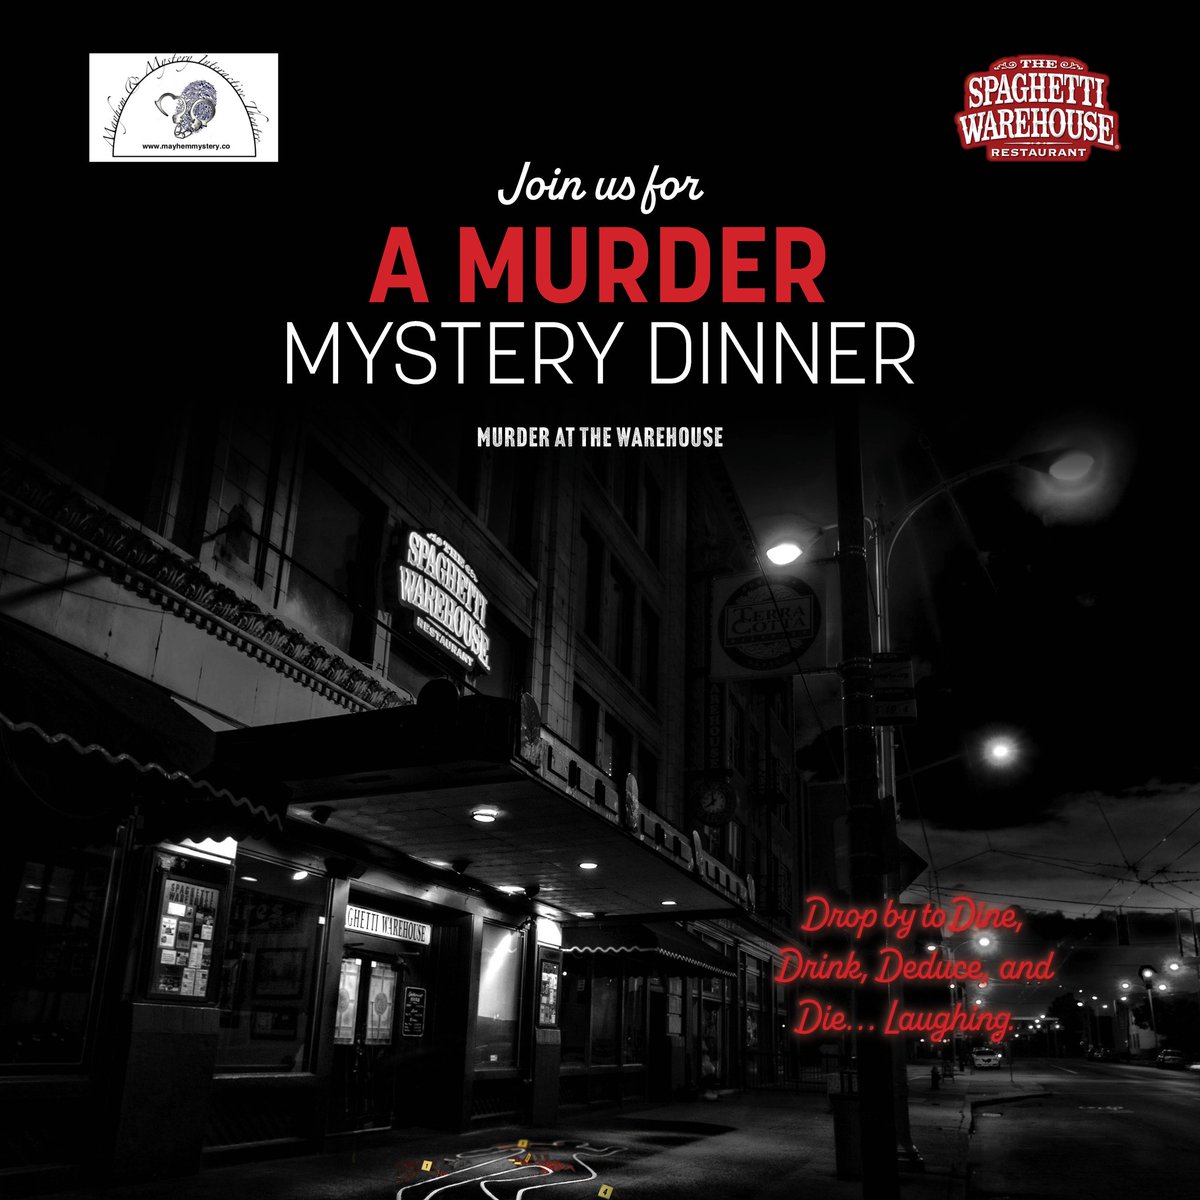 Will you crack the case? 🕵️‍♀️ Join Mayhem & Mystery at Spaghetti Warehouse for 'Fatale Flaw' every Monday at 7 p.m.! 937-461-3913 for reservations & more info. Looking for more to do downtown? Check out our online events calendar at downtowndayton.org/events-calendar